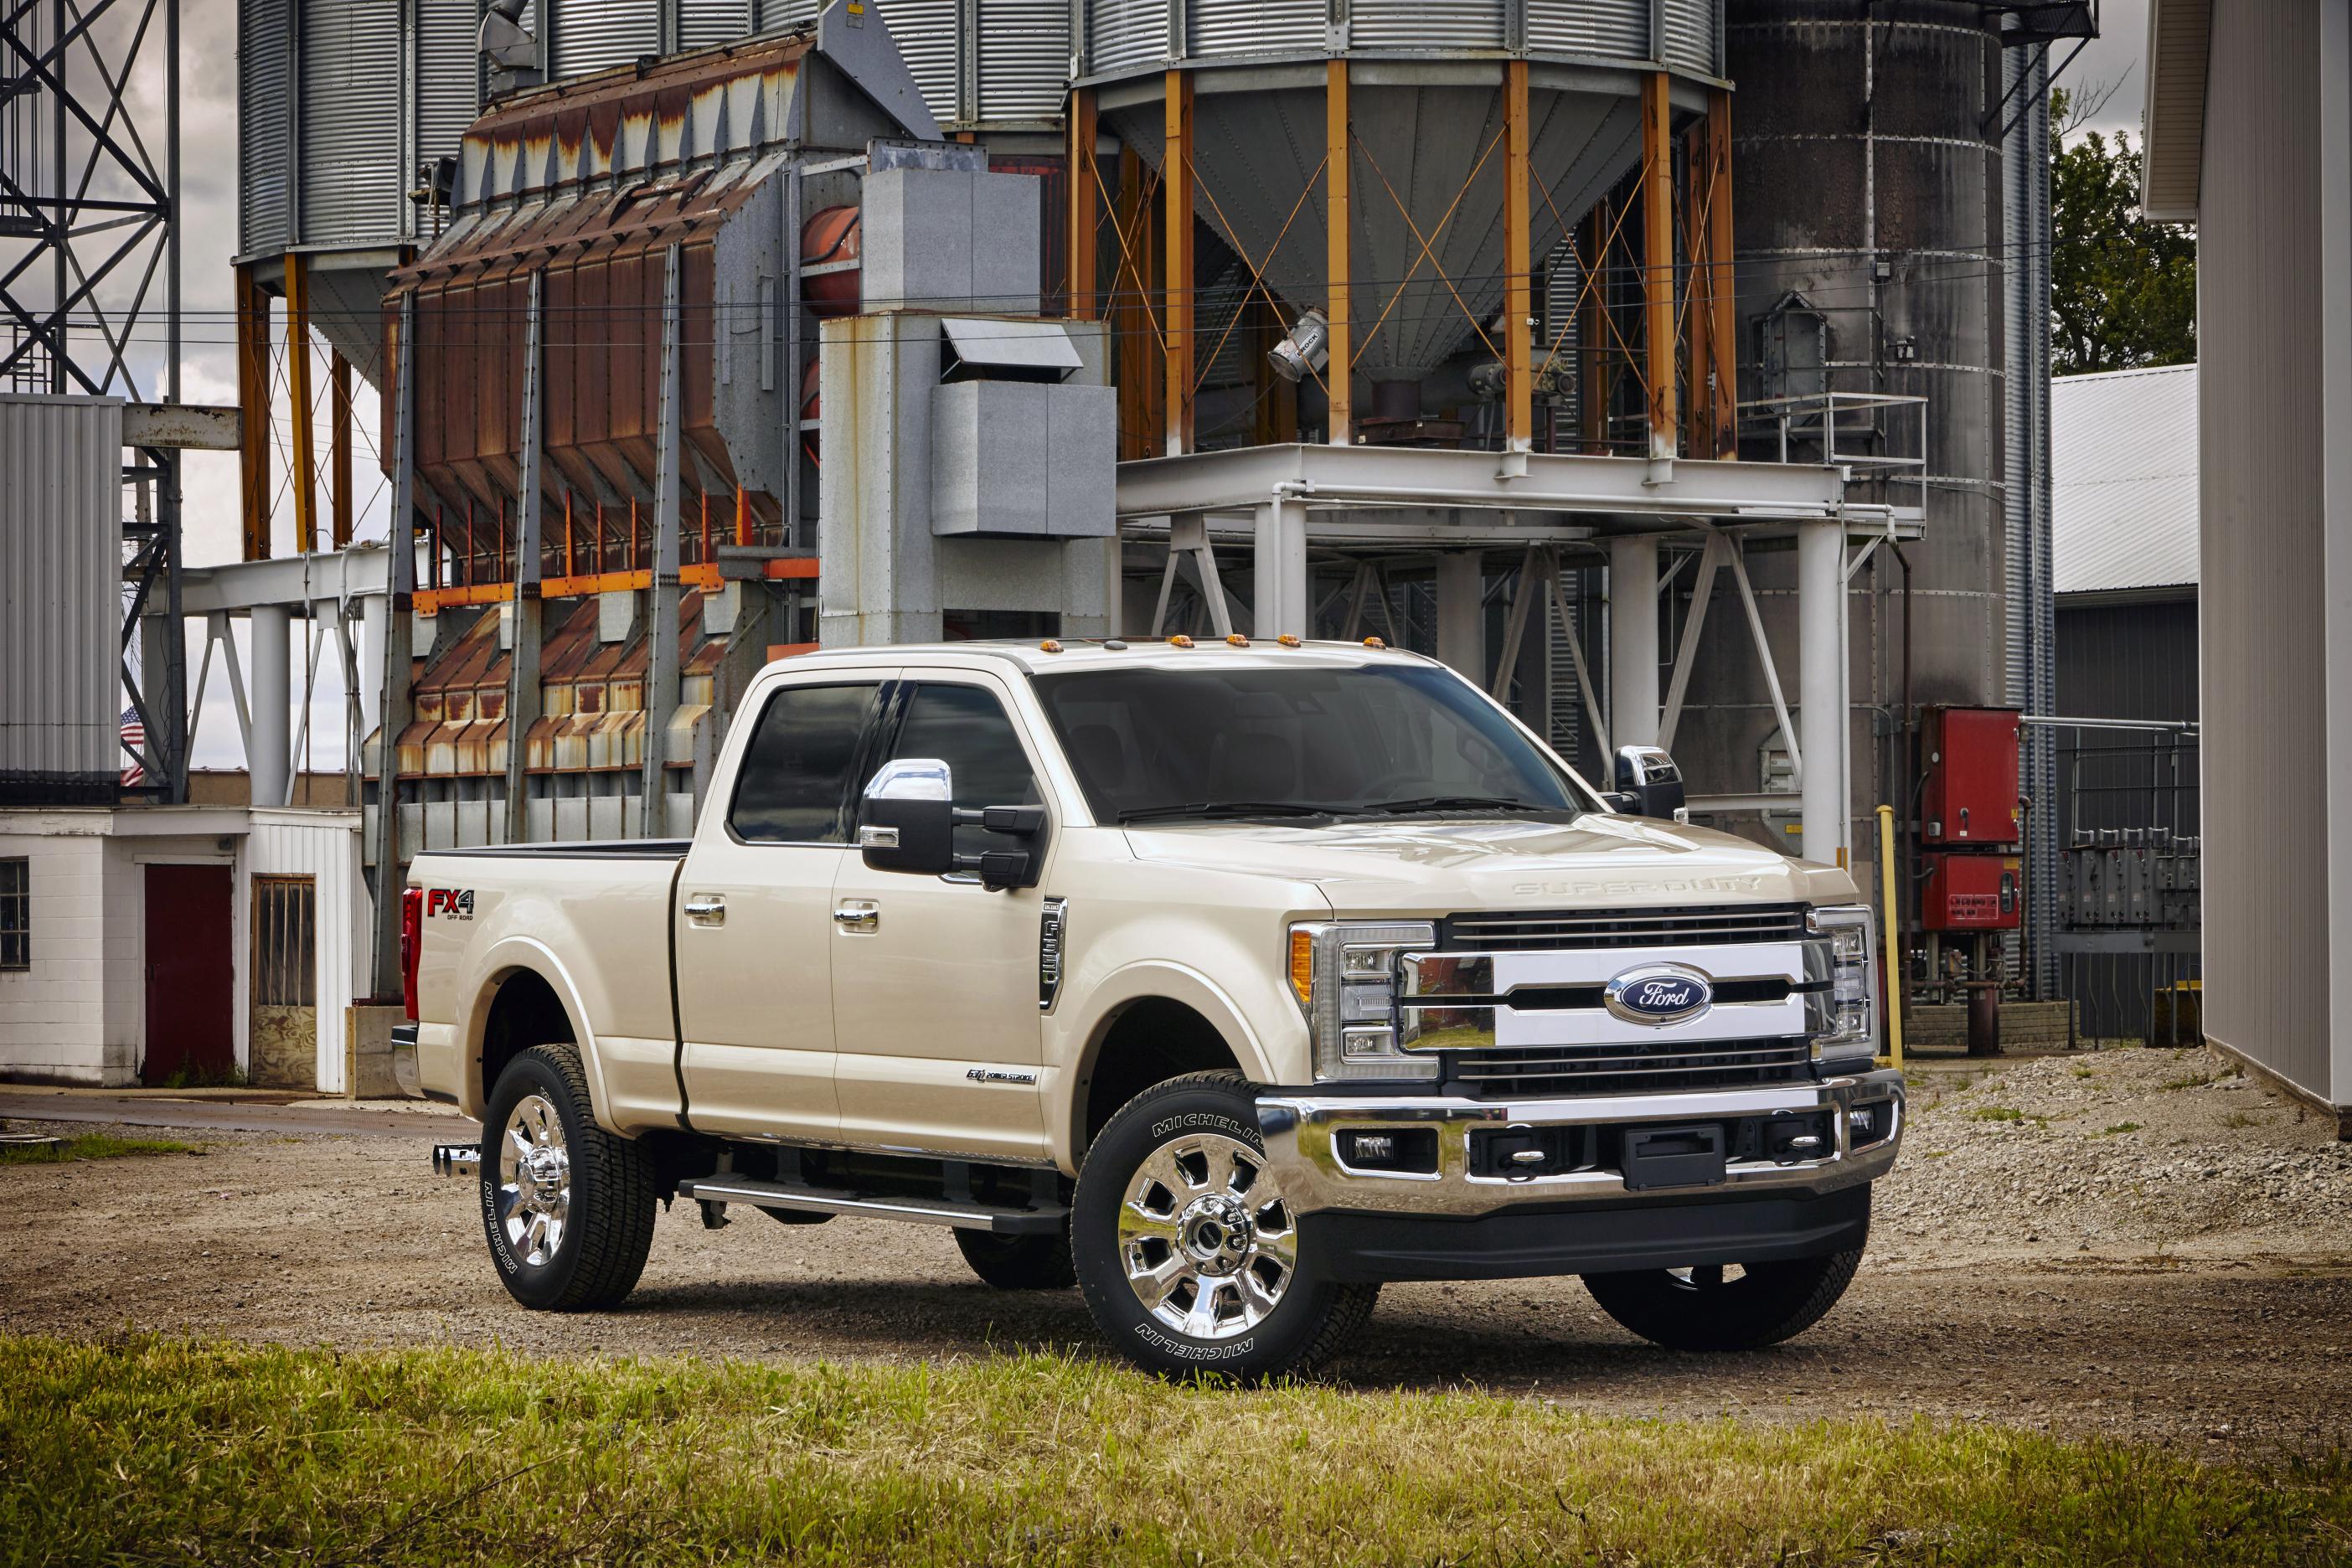 1 Ford F-Series Top-10 Best-selling Vehicles in the USA to date for 2017